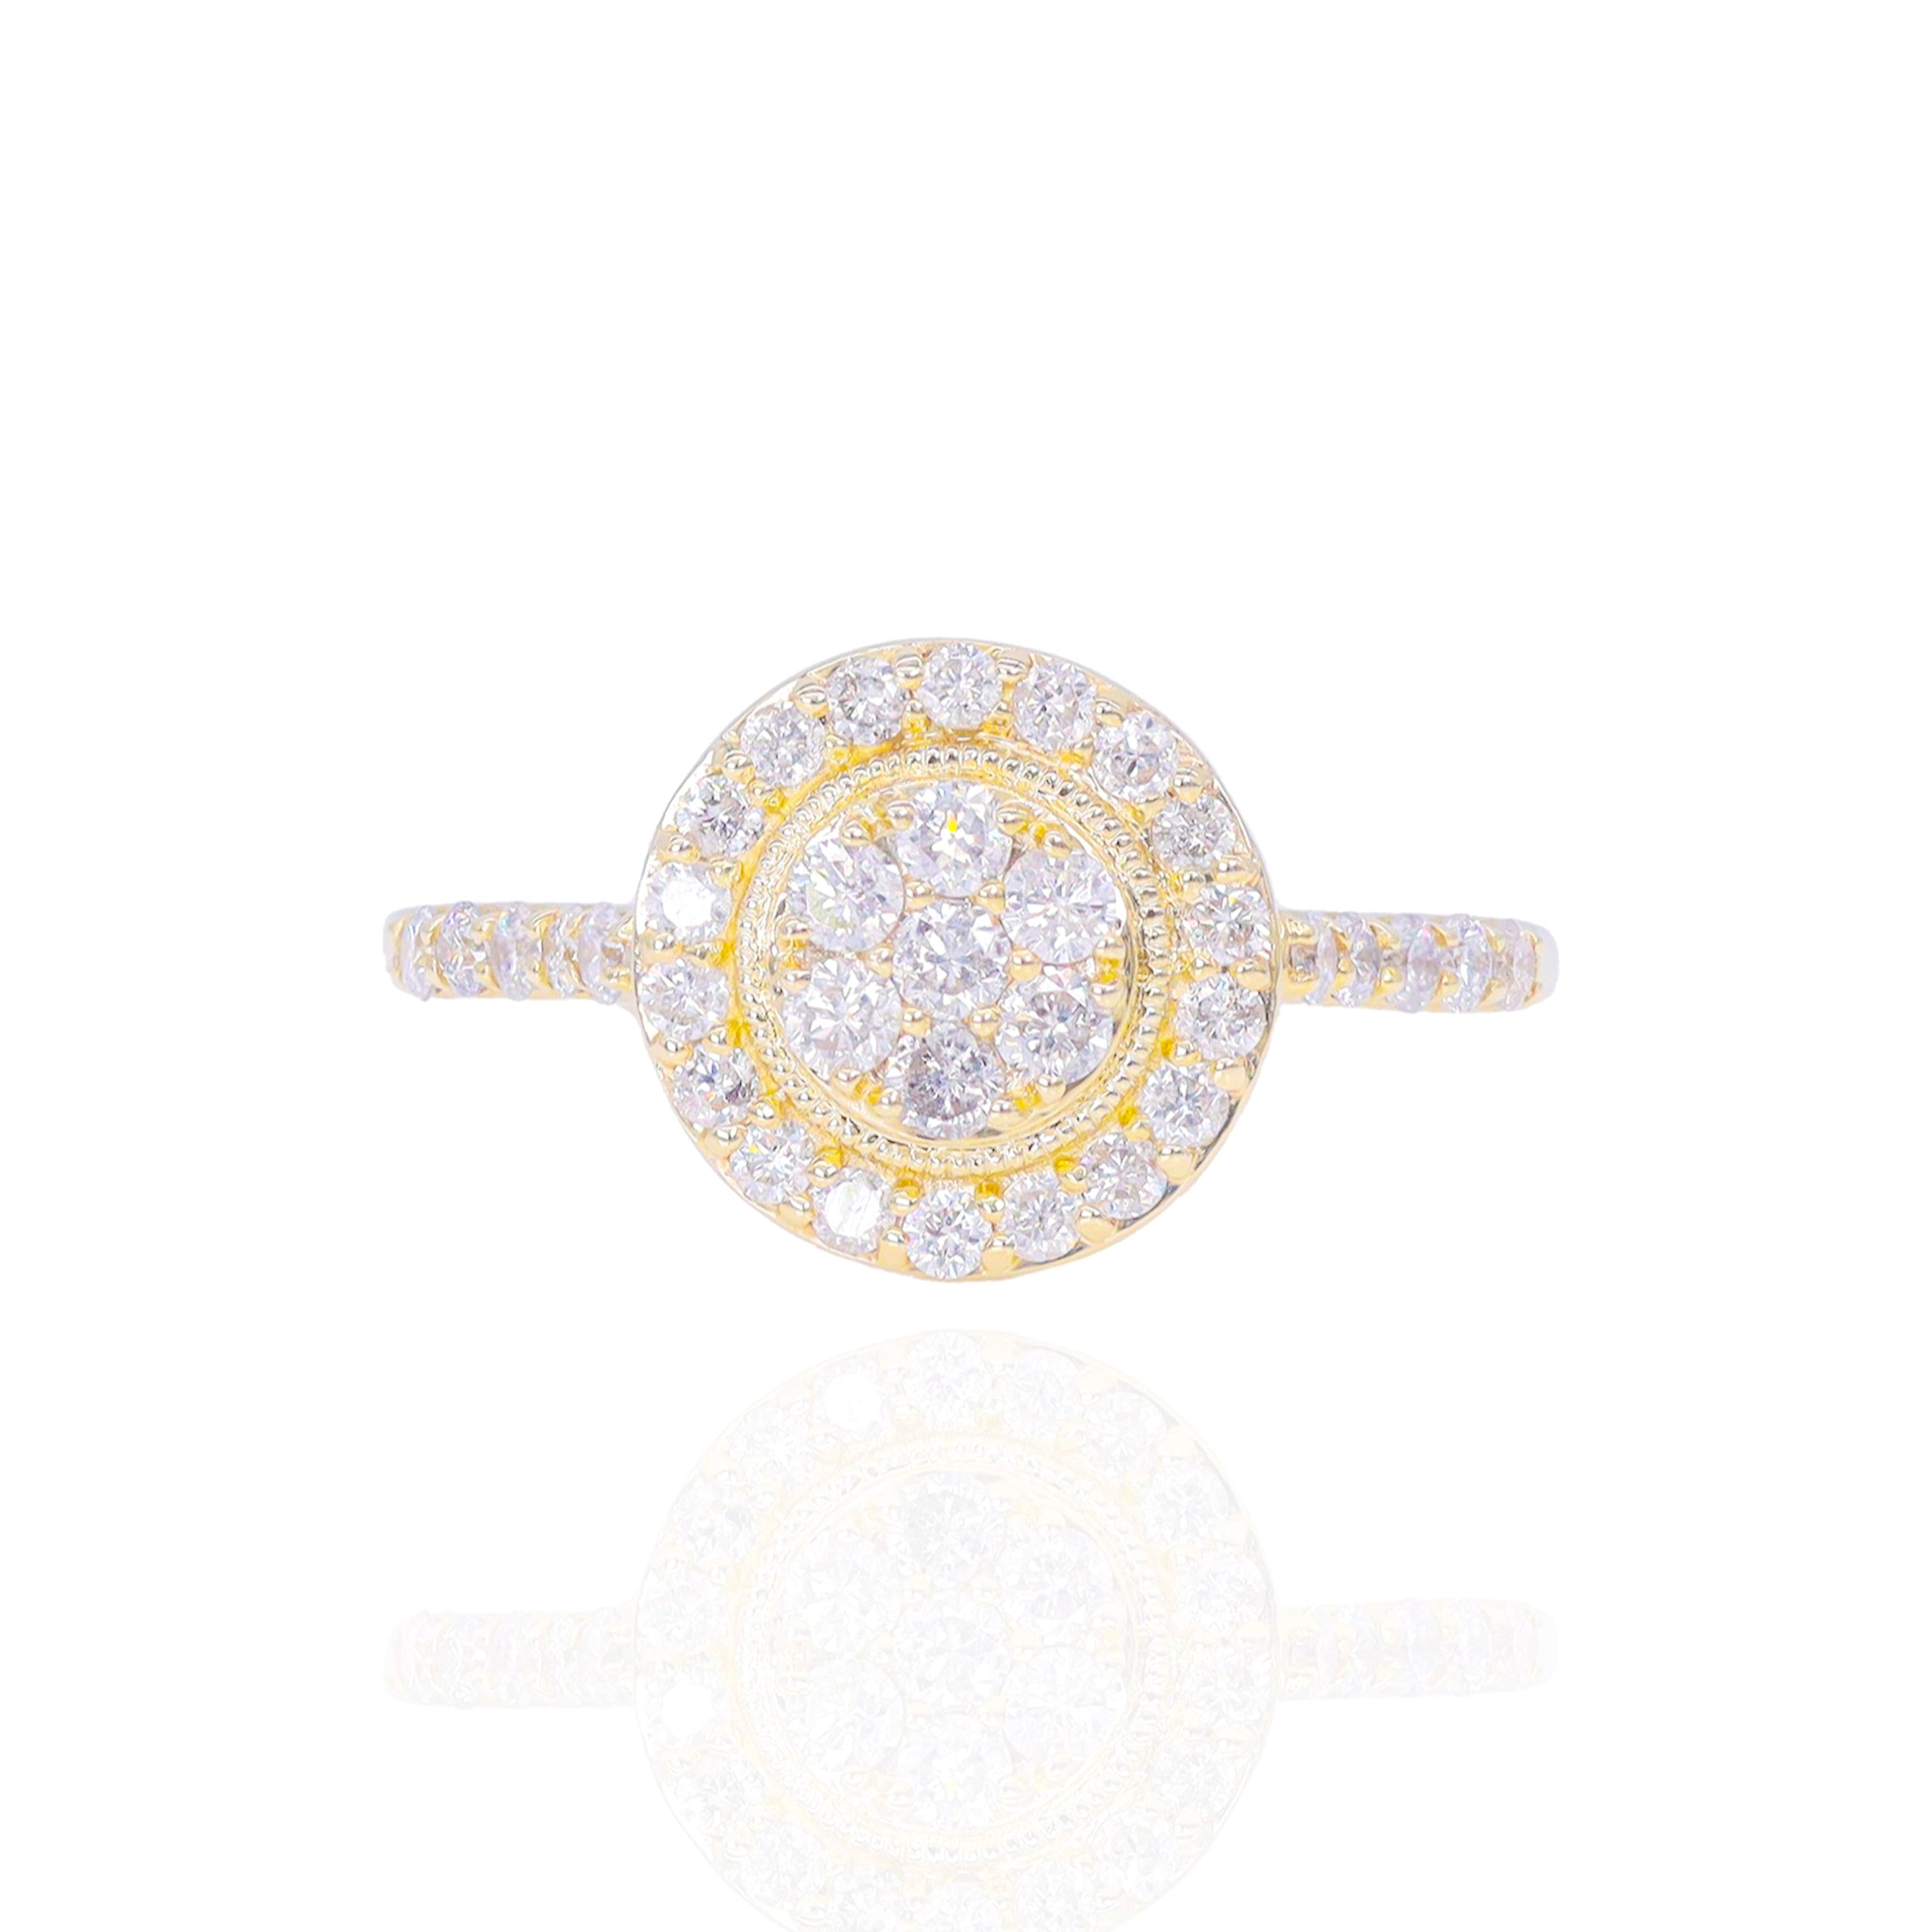 Round Shape with Diamond and Gold Halo Diamond Engagement Ring